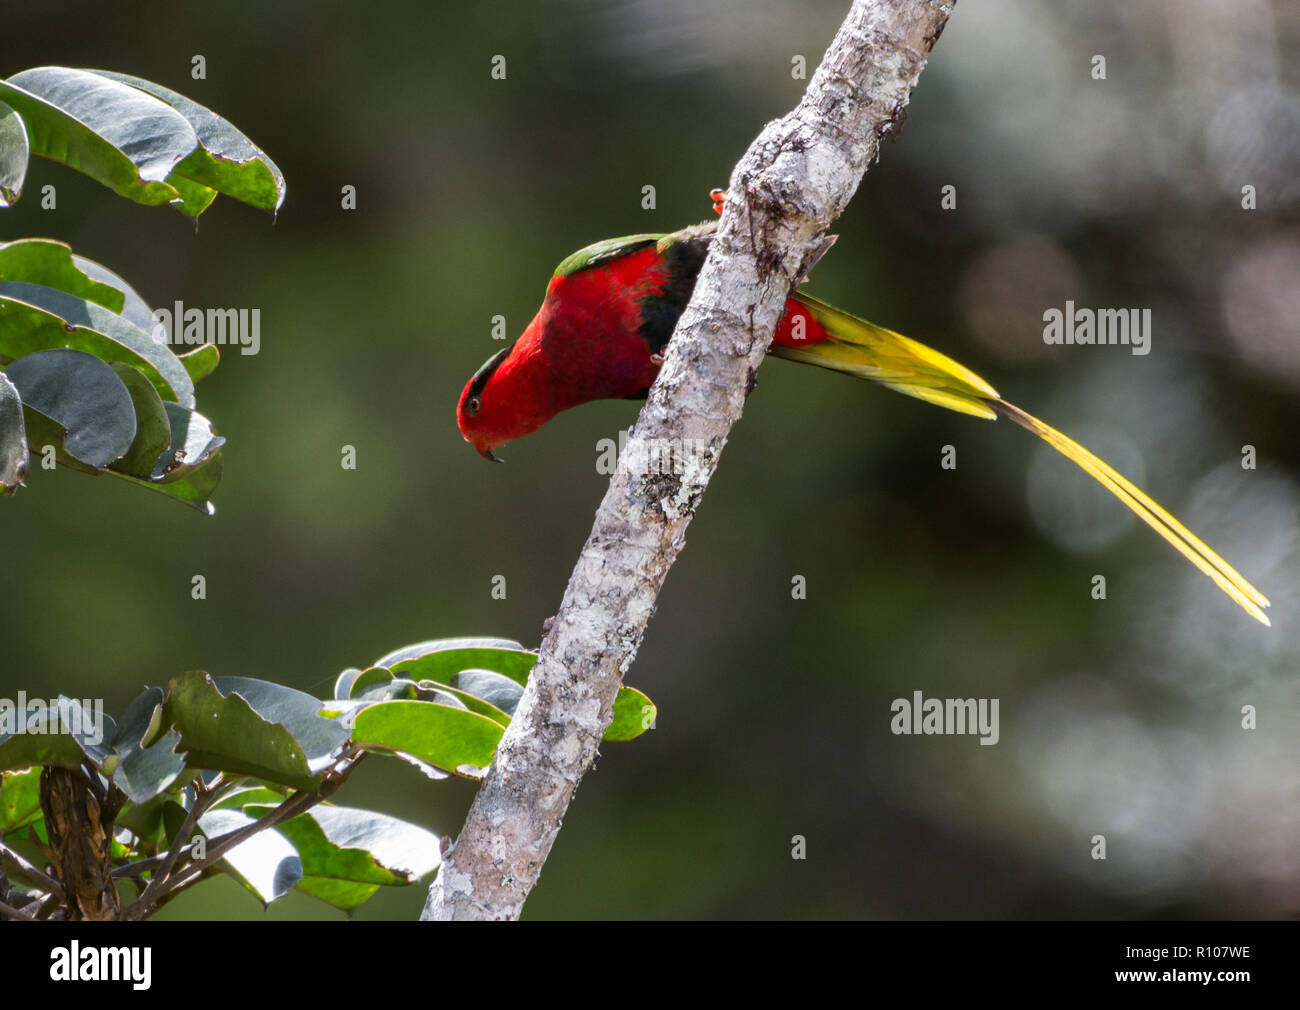 A red form Papuan Lorikeet (Charmosyna papou), or Stella's Lorikeet, perched on a branch. Snow Mountains, Papua, Indonesia. Stock Photo